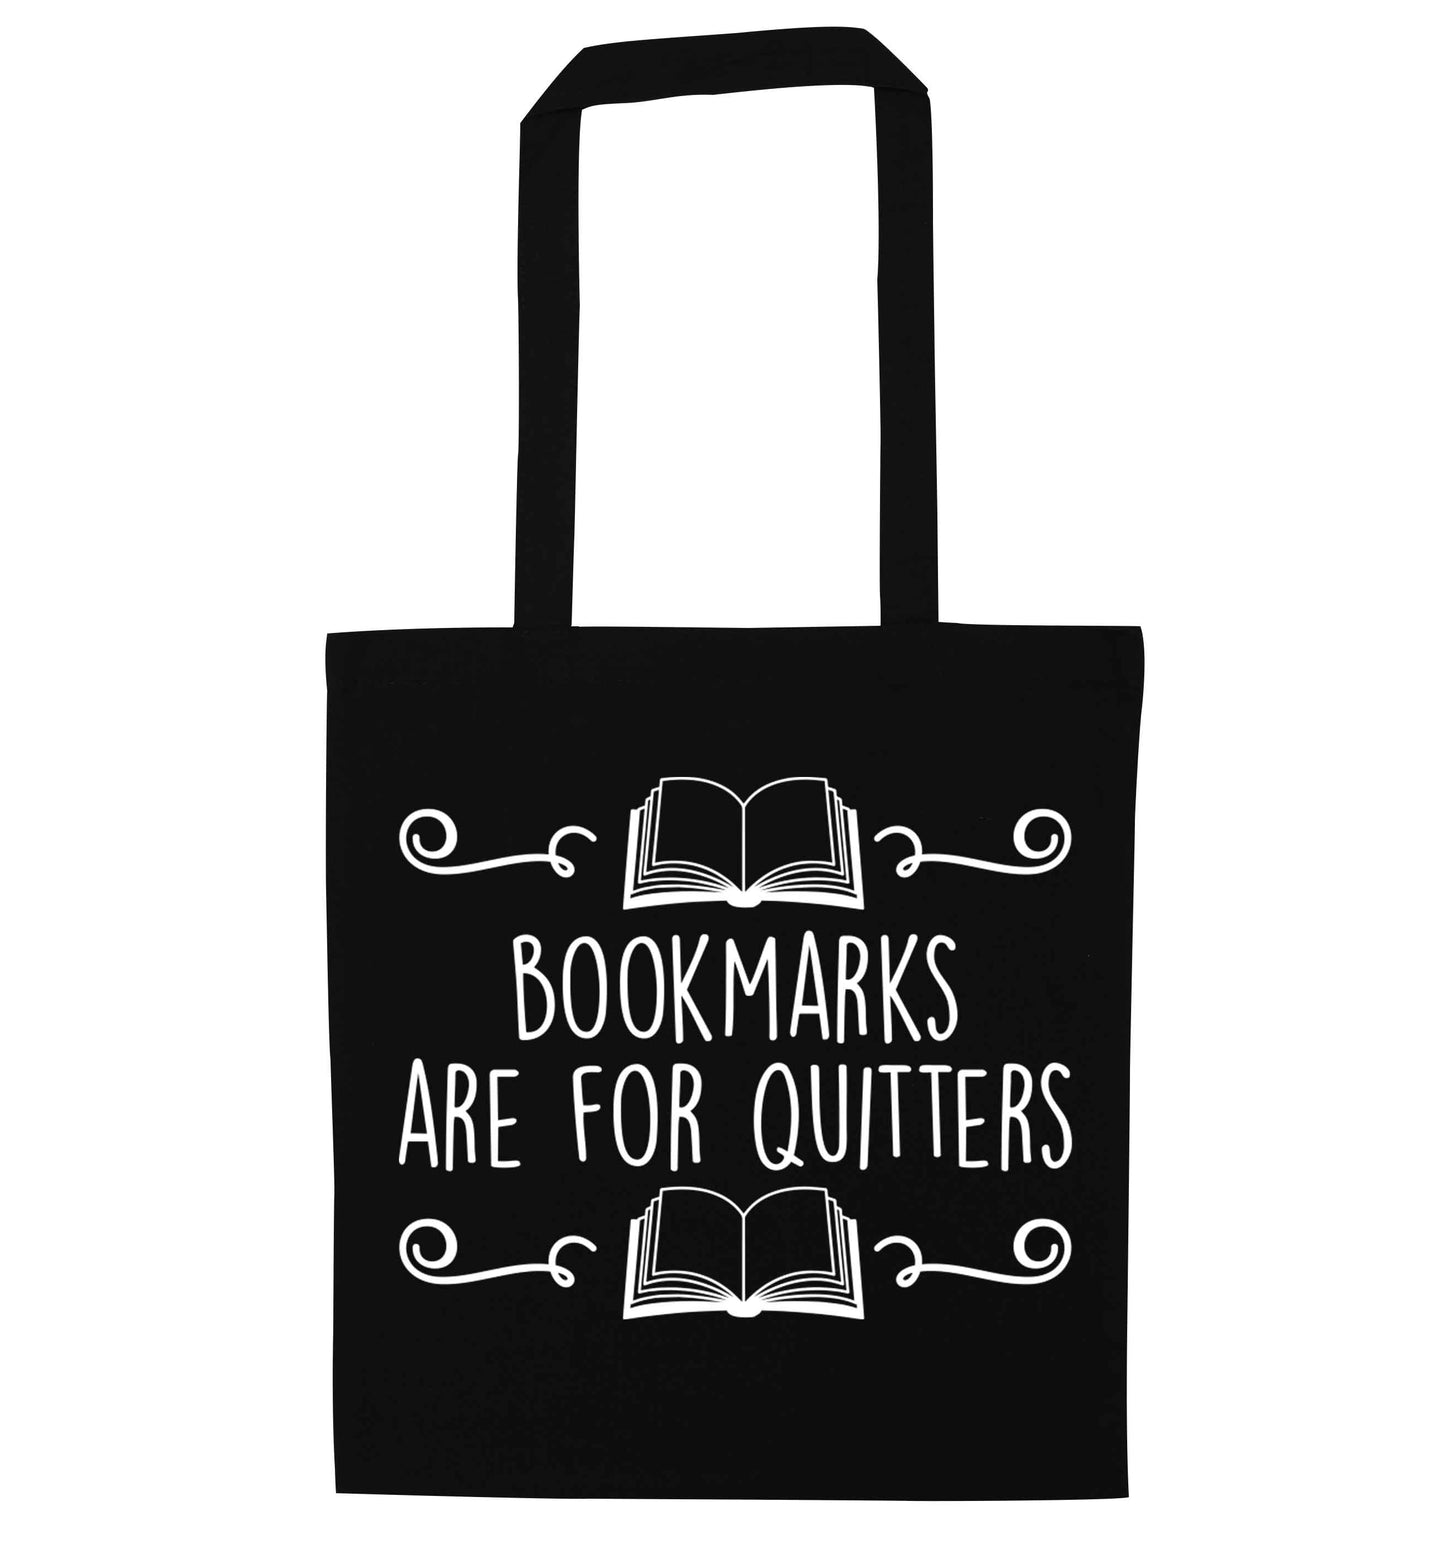 Bookmarks are for quitters black tote bag